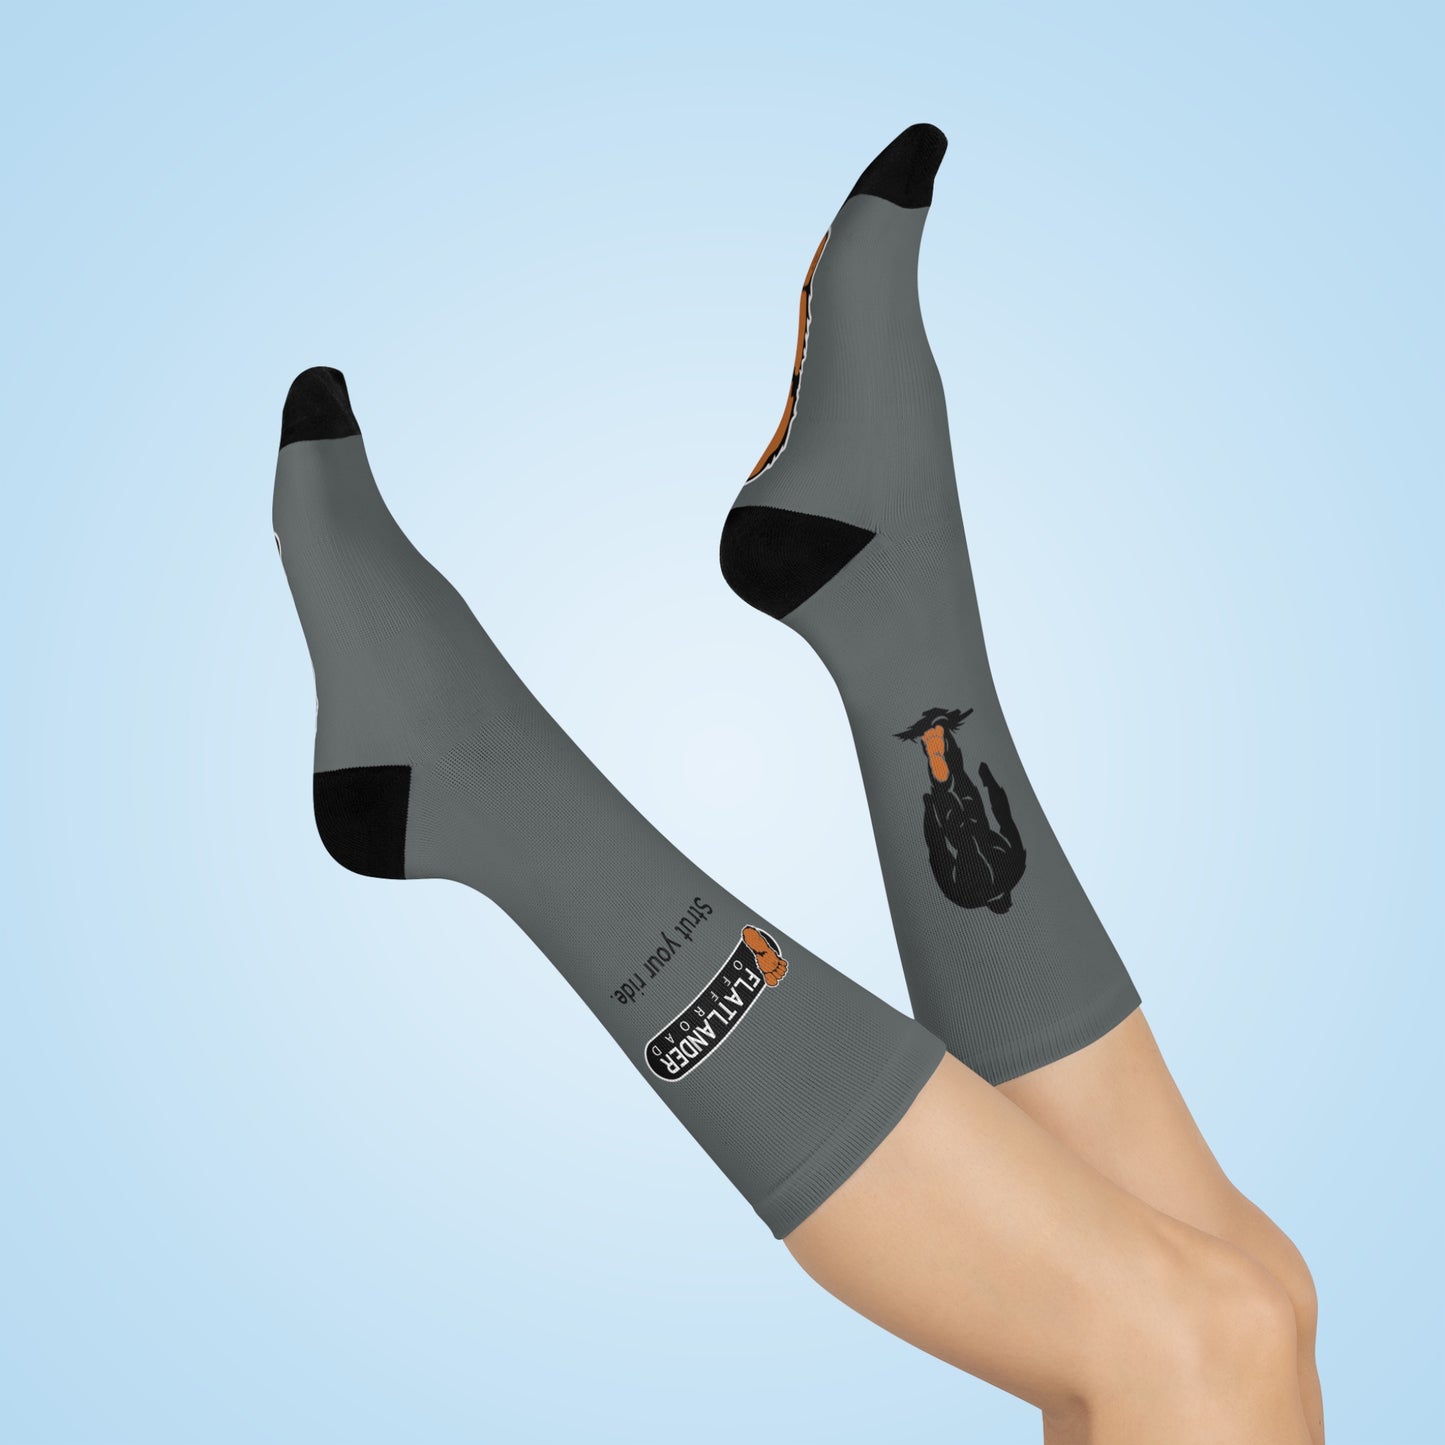 "Strut Your Ride!" with Flatlander Offroad Cushioned Crew Socks